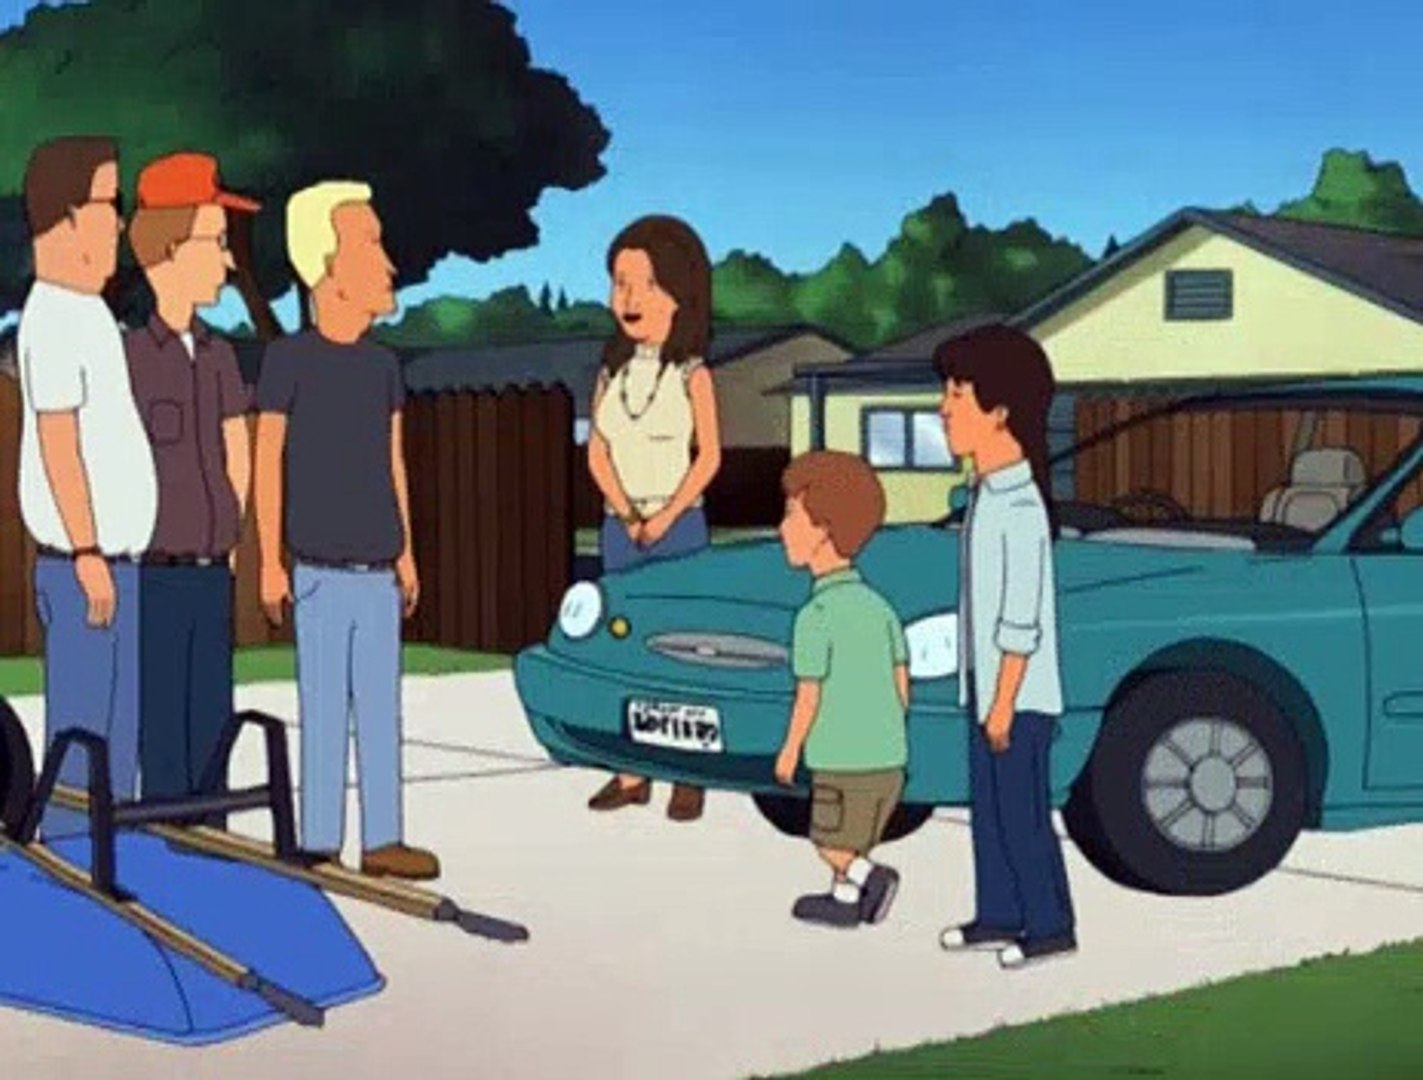 King of The Hill: (Season 1 - 12) Intro [1080p] 